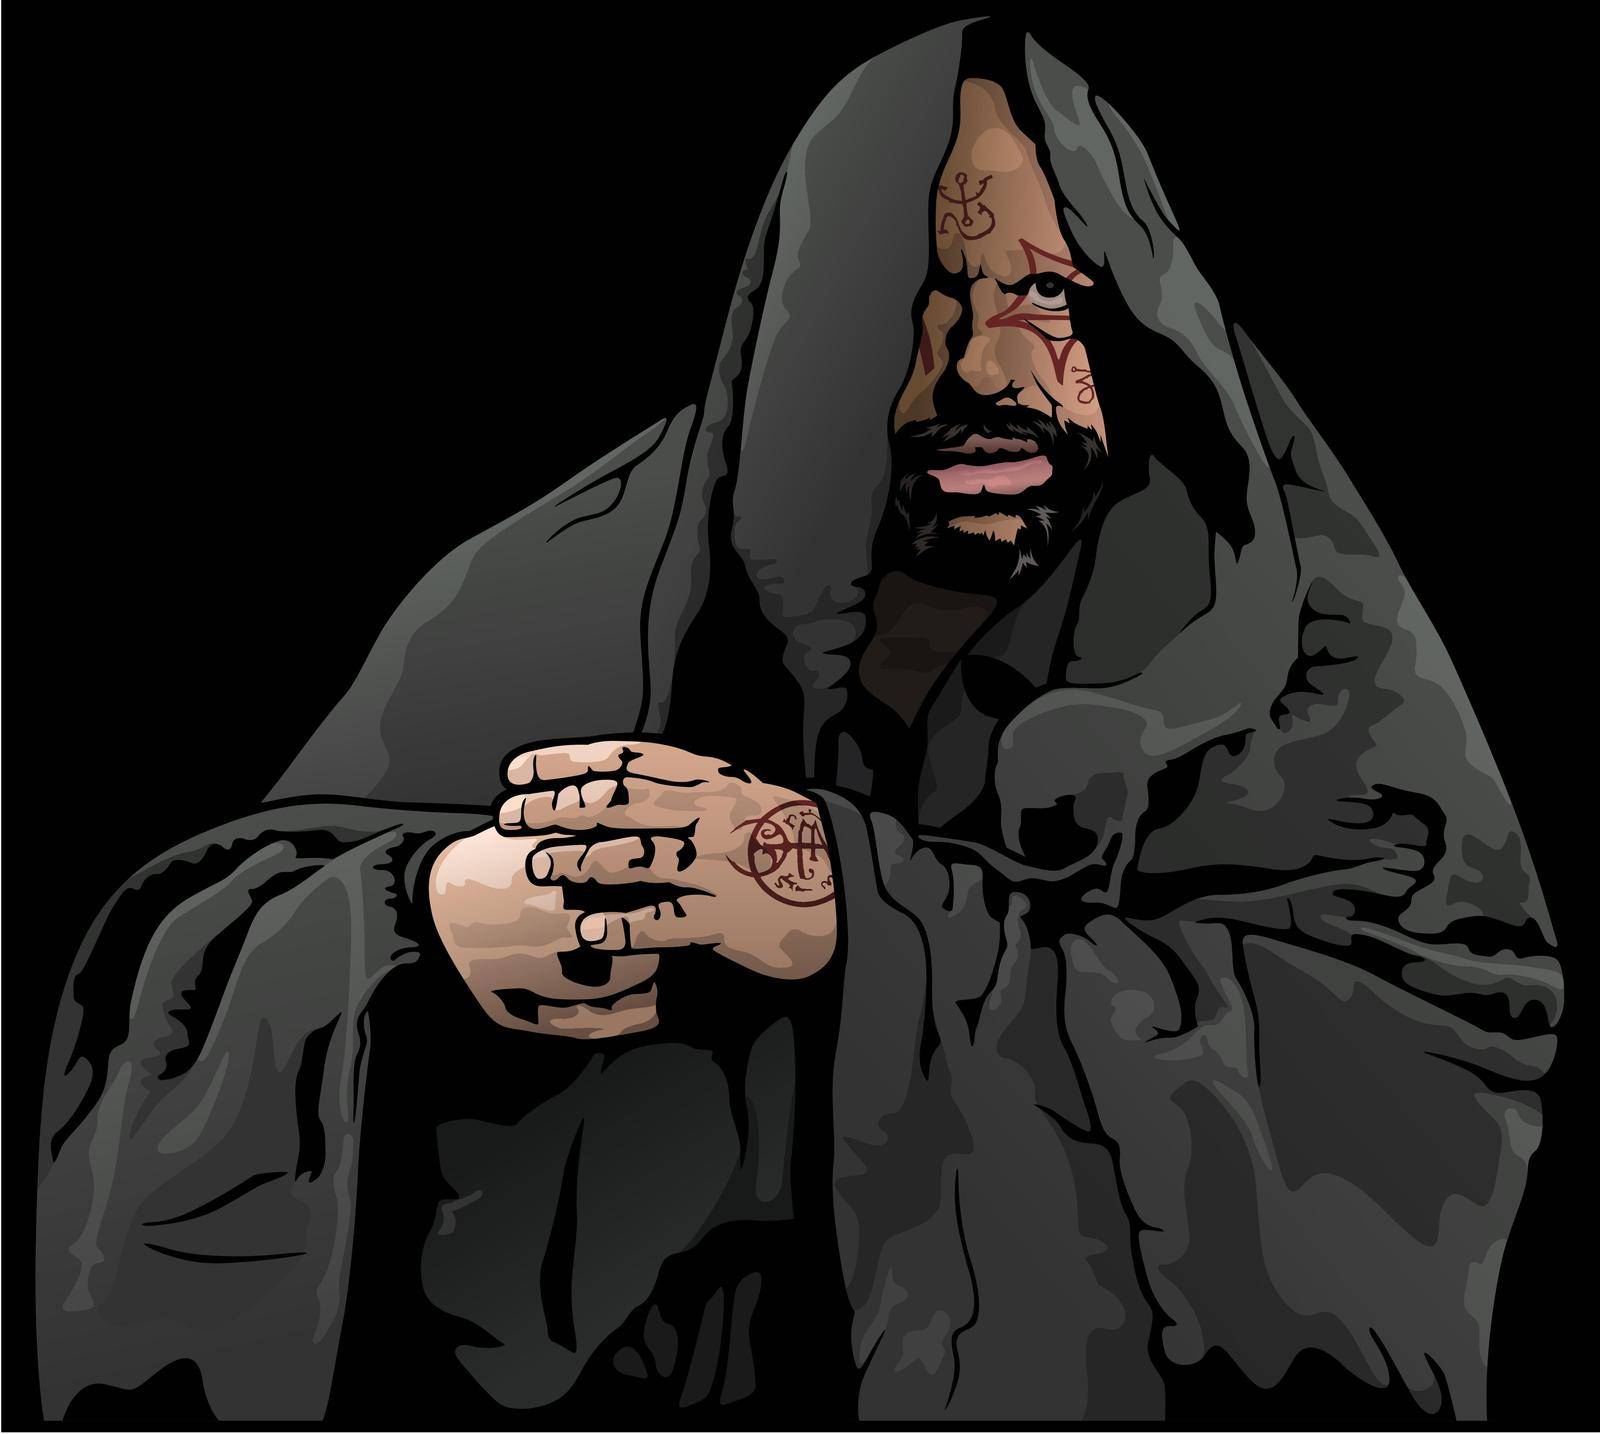 Mysterious Monk with Magic Tattoo - Colored Illustration Isolated on Black Background, Vector